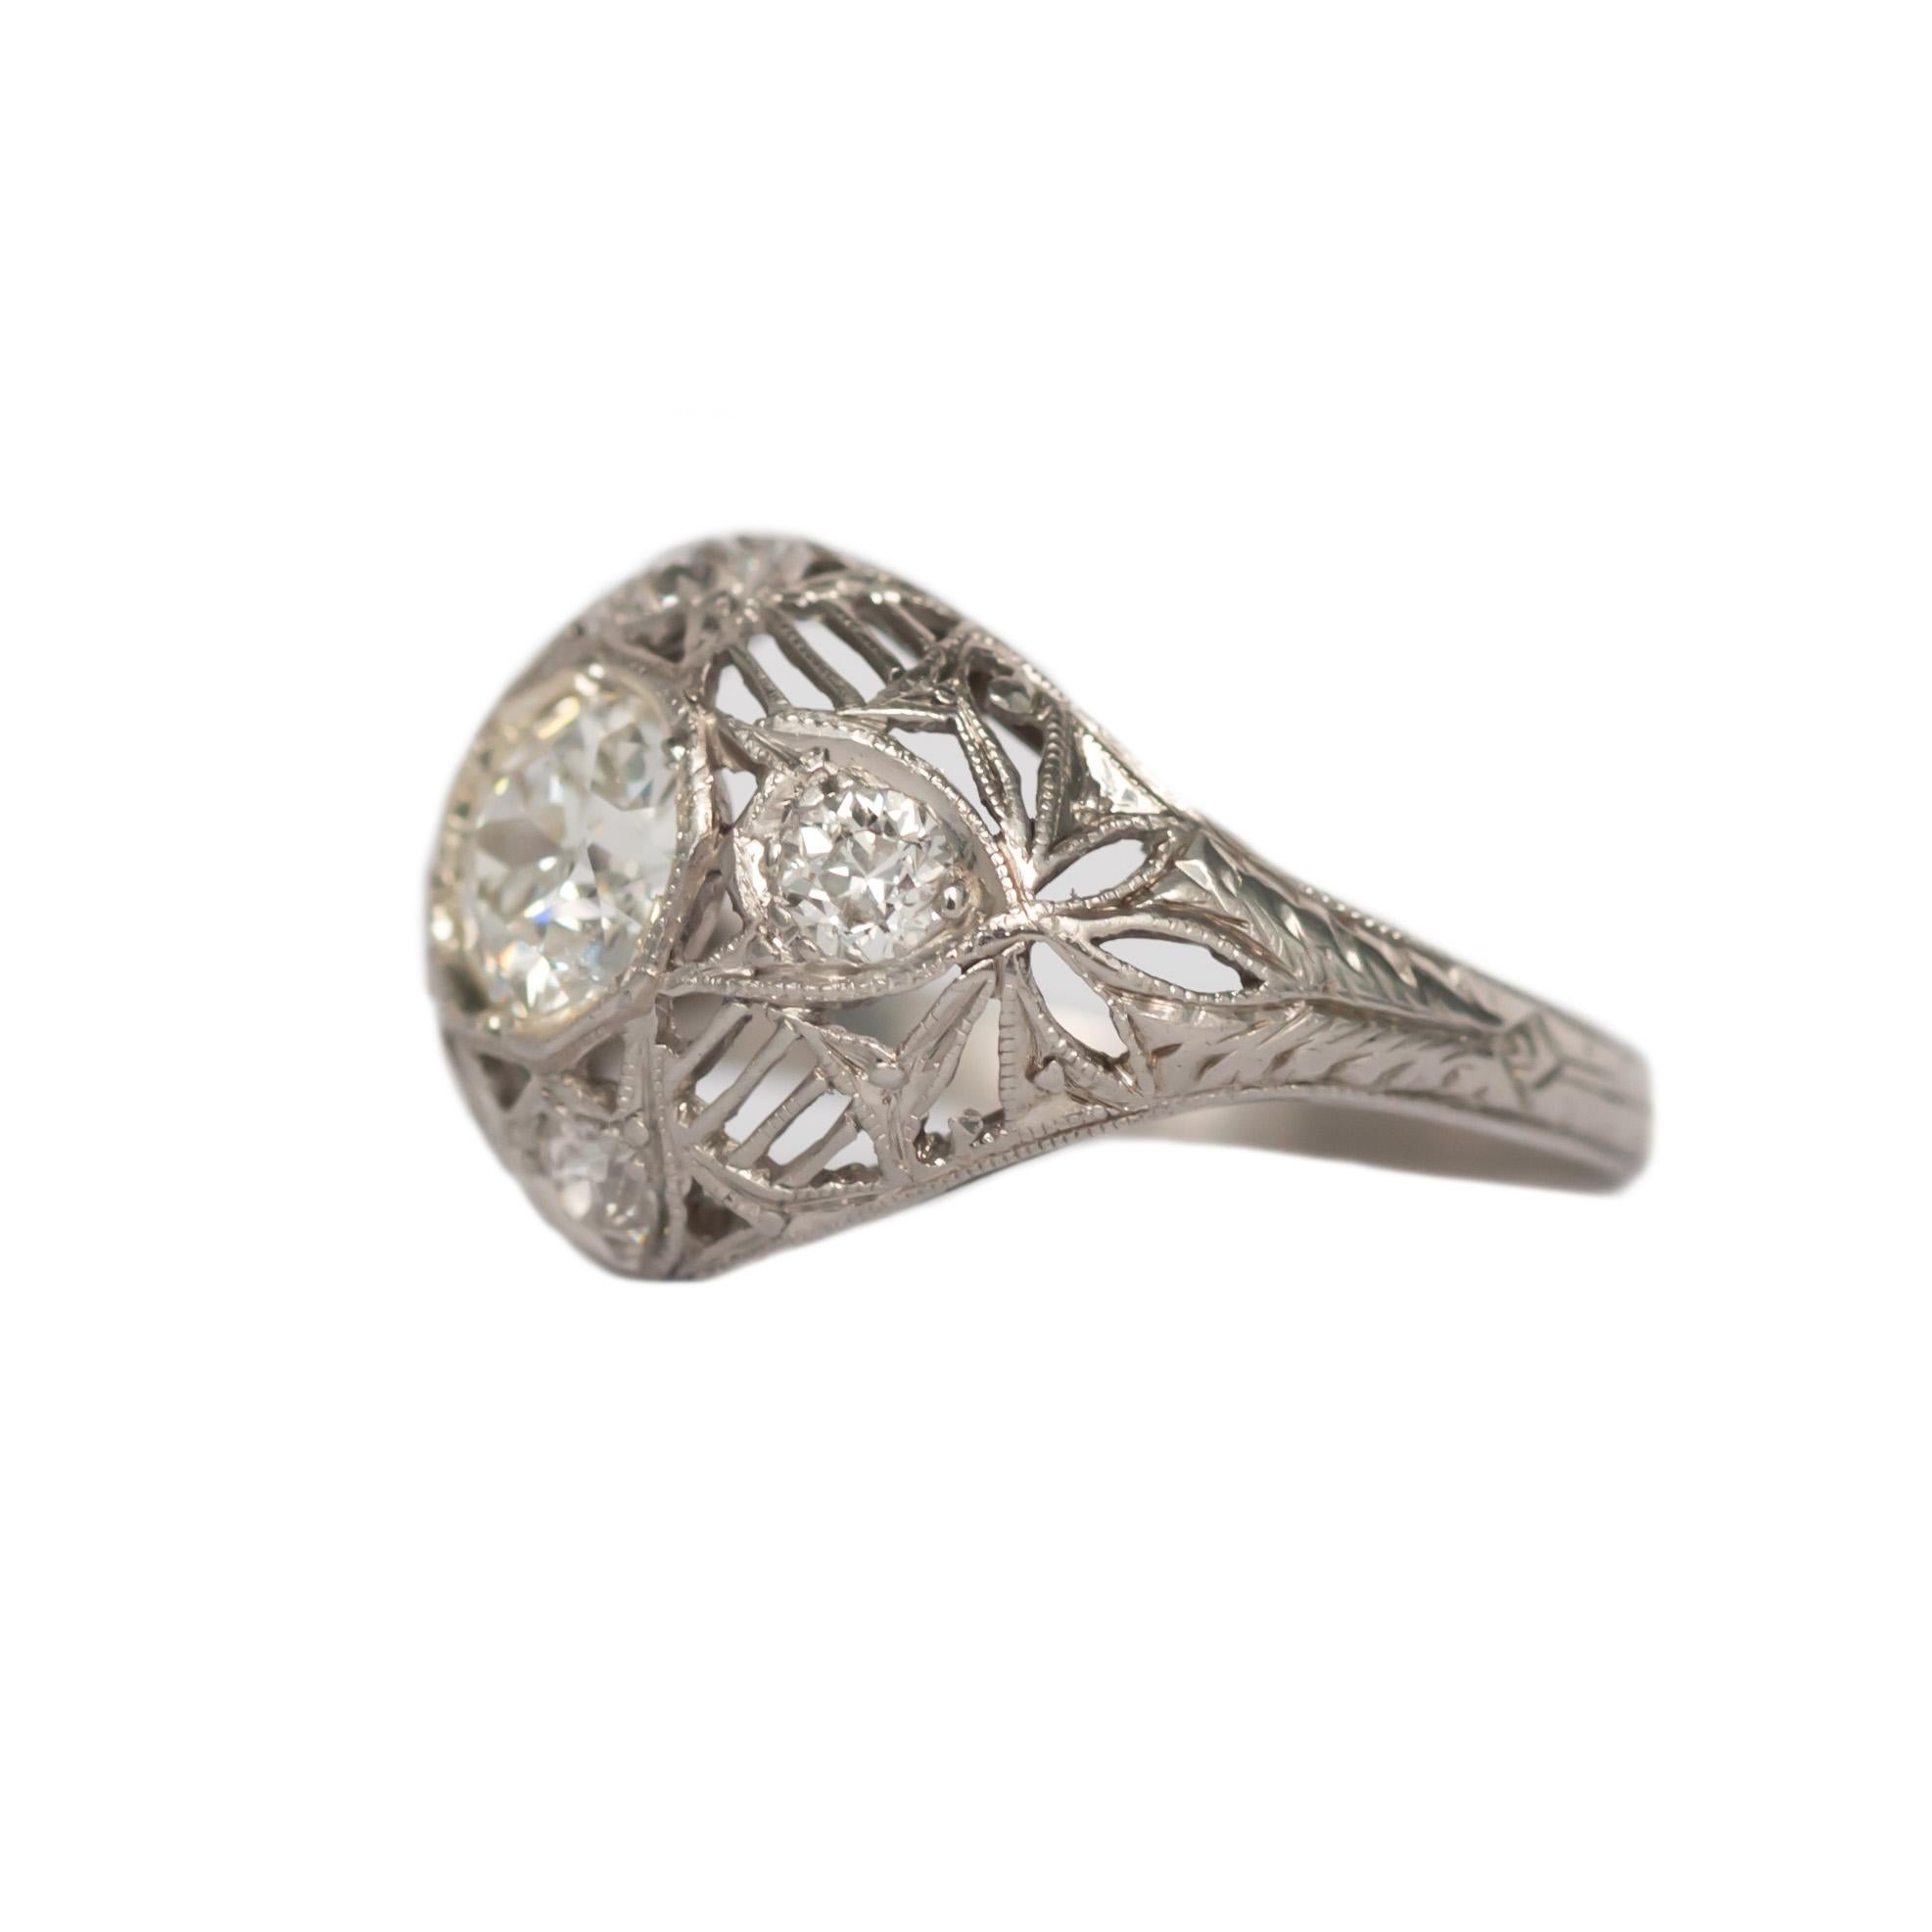 Item Details: 
Ring Size: 6.75
Metal Type: Platinum [Tested & Hallmarked]
Weight: 4.1 grams

Center Diamond Details
Shape: Old European Brilliant
Carat Weight: .70 carat
Color: H
Clarity: VS1

Side Stone Details: 
Shape: Old European 
Total Carat